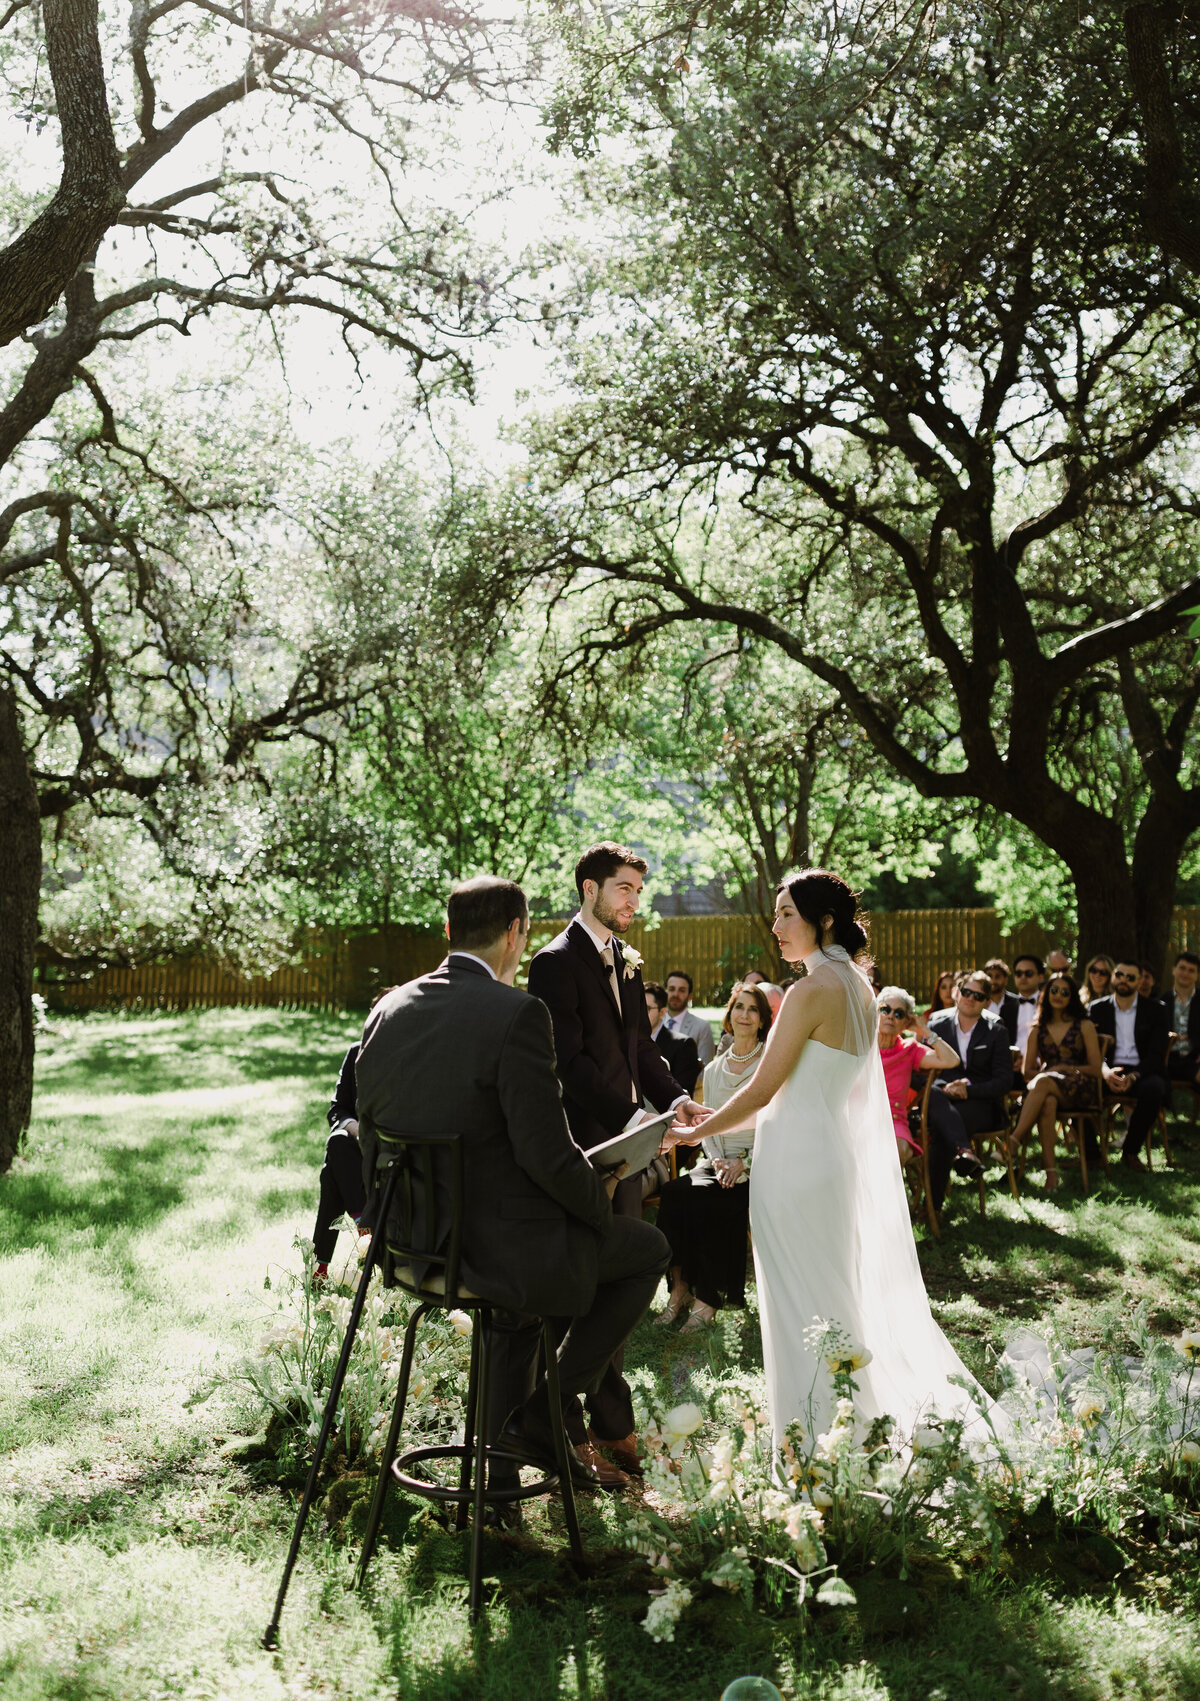 Bride and groom exchanging vows at outdoor wedding ceremony at  Mattie's Austin